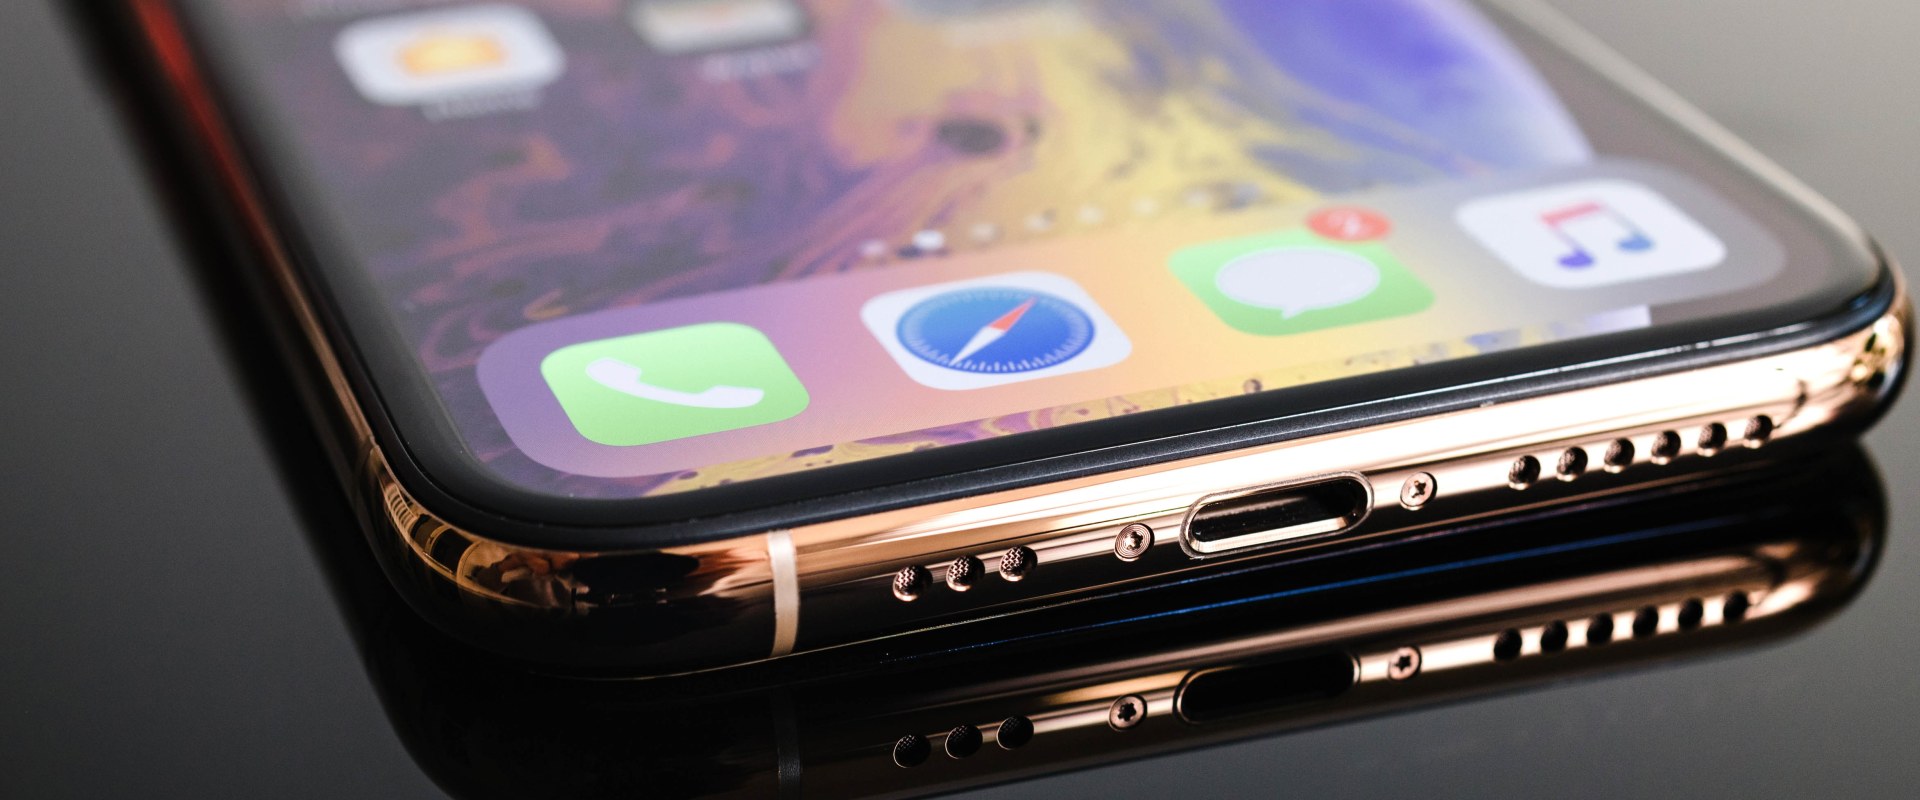 Does an iphone need to be cleaned?